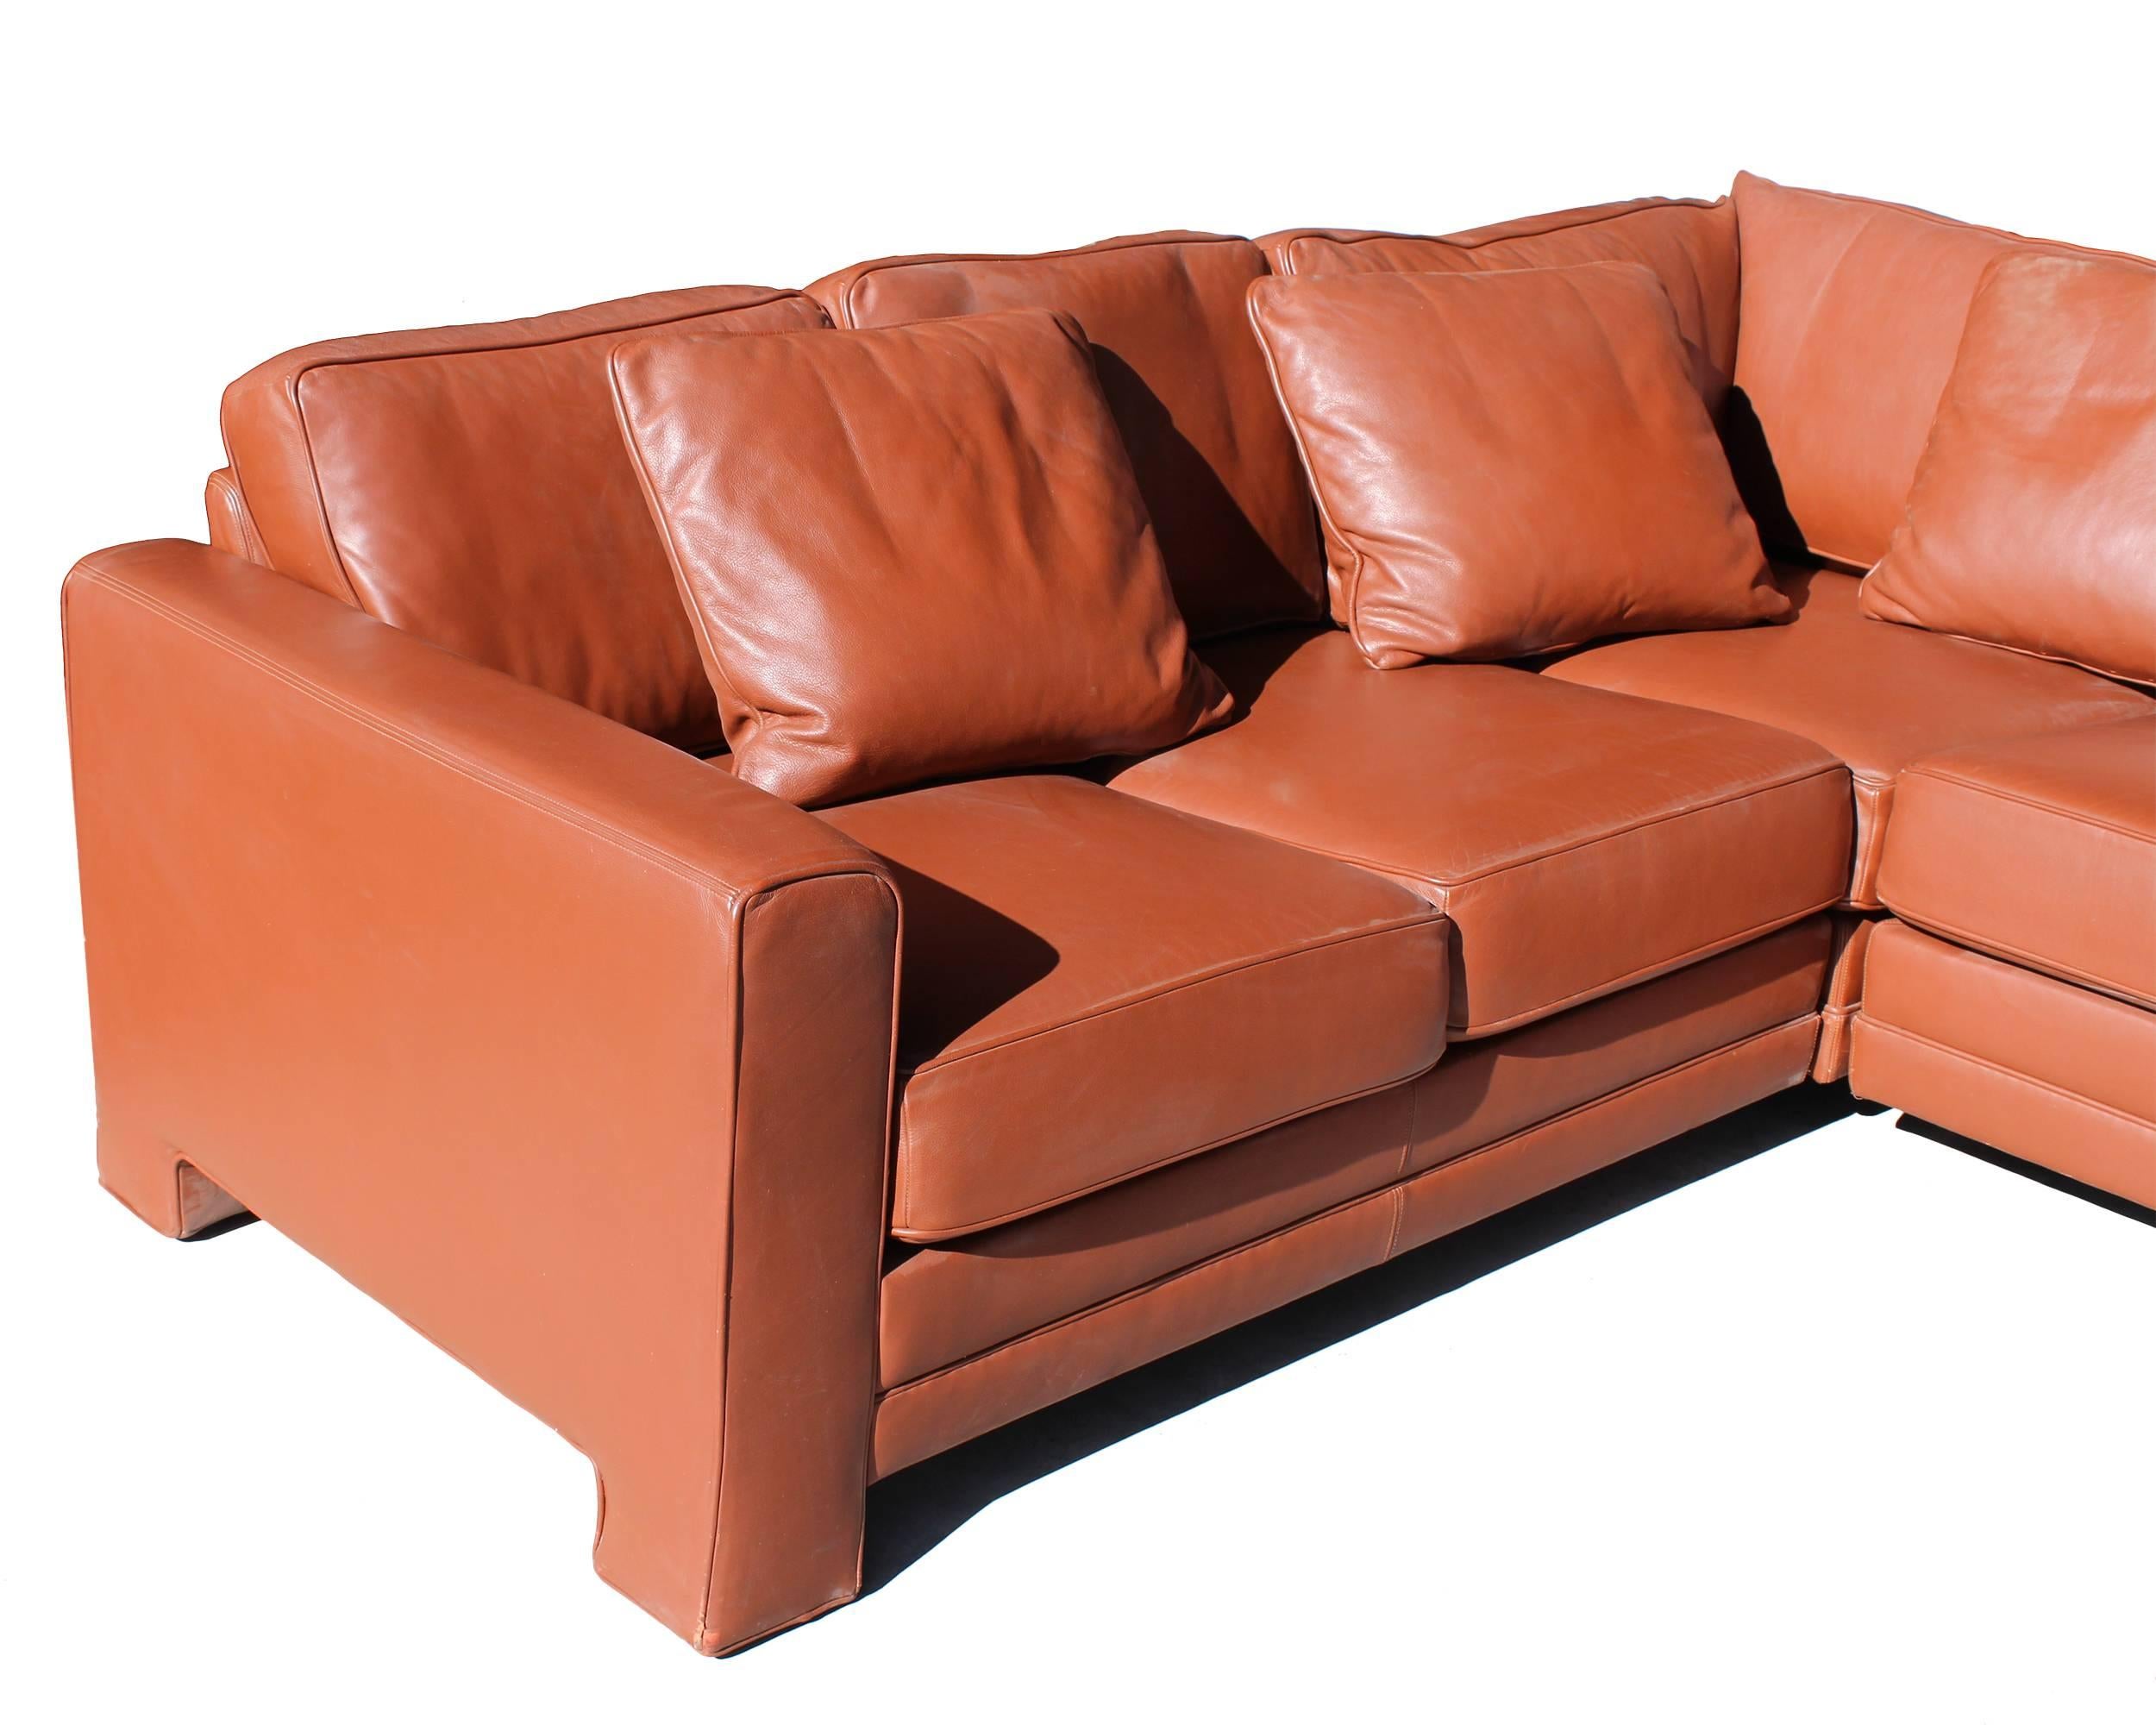 Renowned Austrian furniture maker Hans Kaufeld sofa. Modular furniture in red leather allowing for different combinations.